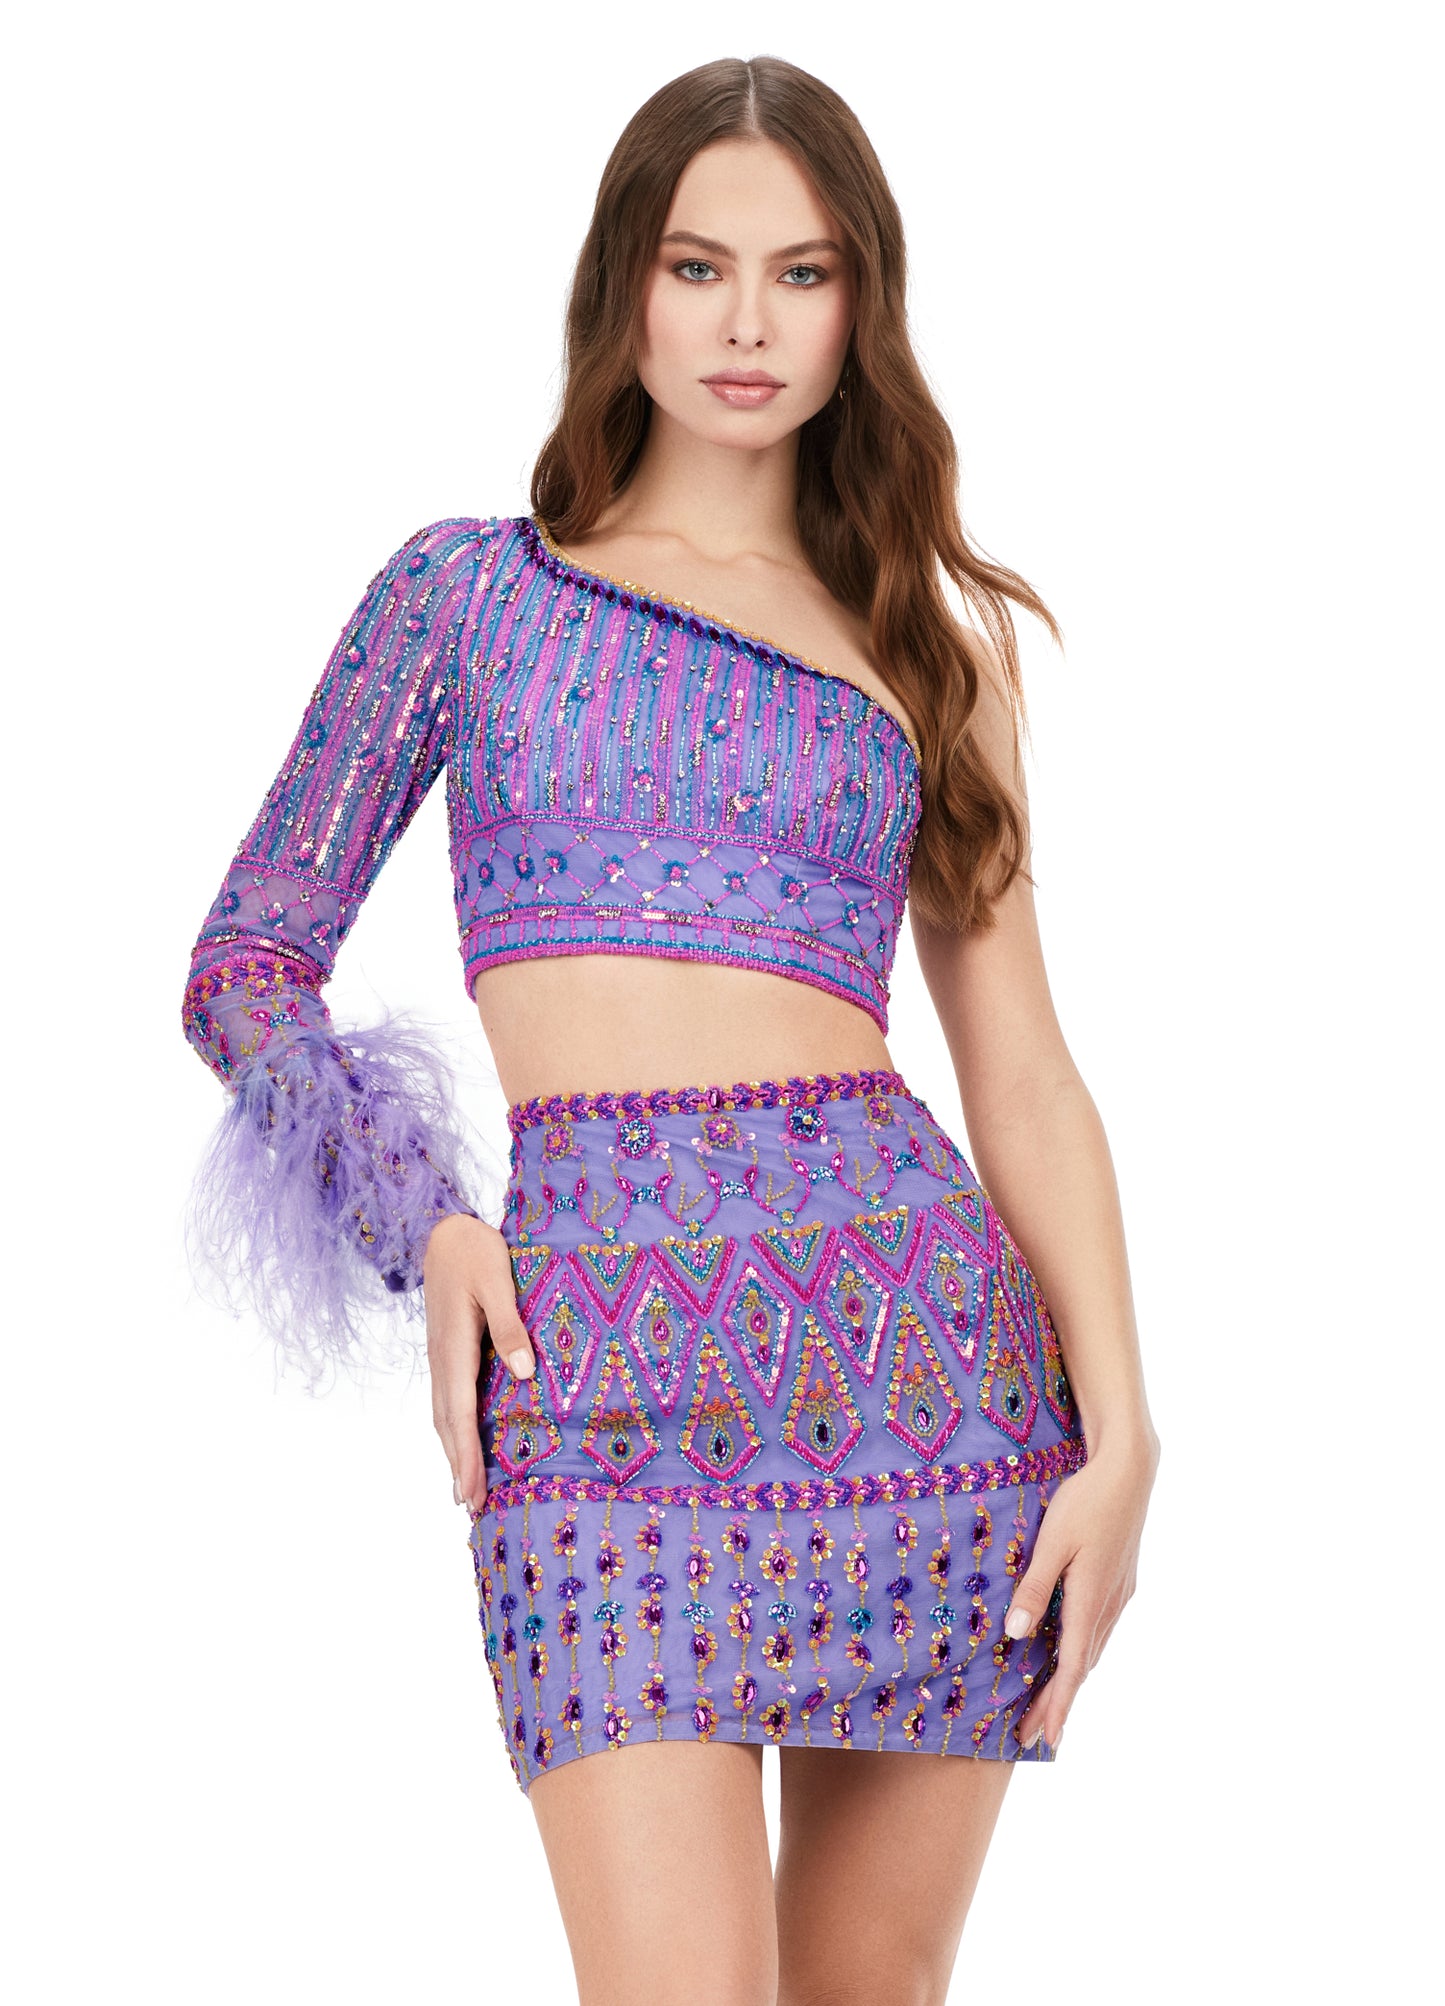 Ashley Lauren 4597 Two Piece Beaded Sequin Long Sleeve Feather Cuff Cocktail Dress Formal Stand out in this show stopping two piece set at your next event. The one sleeve top and skirt are adorned with an intricate, bright bead pattern. The sleeve is trimmed in feathers for the perfect pop of fun! One Sleeve Feather Details Two-Piece Fully Beaded Sizes: 00-16 Colors: Lilac, Sky